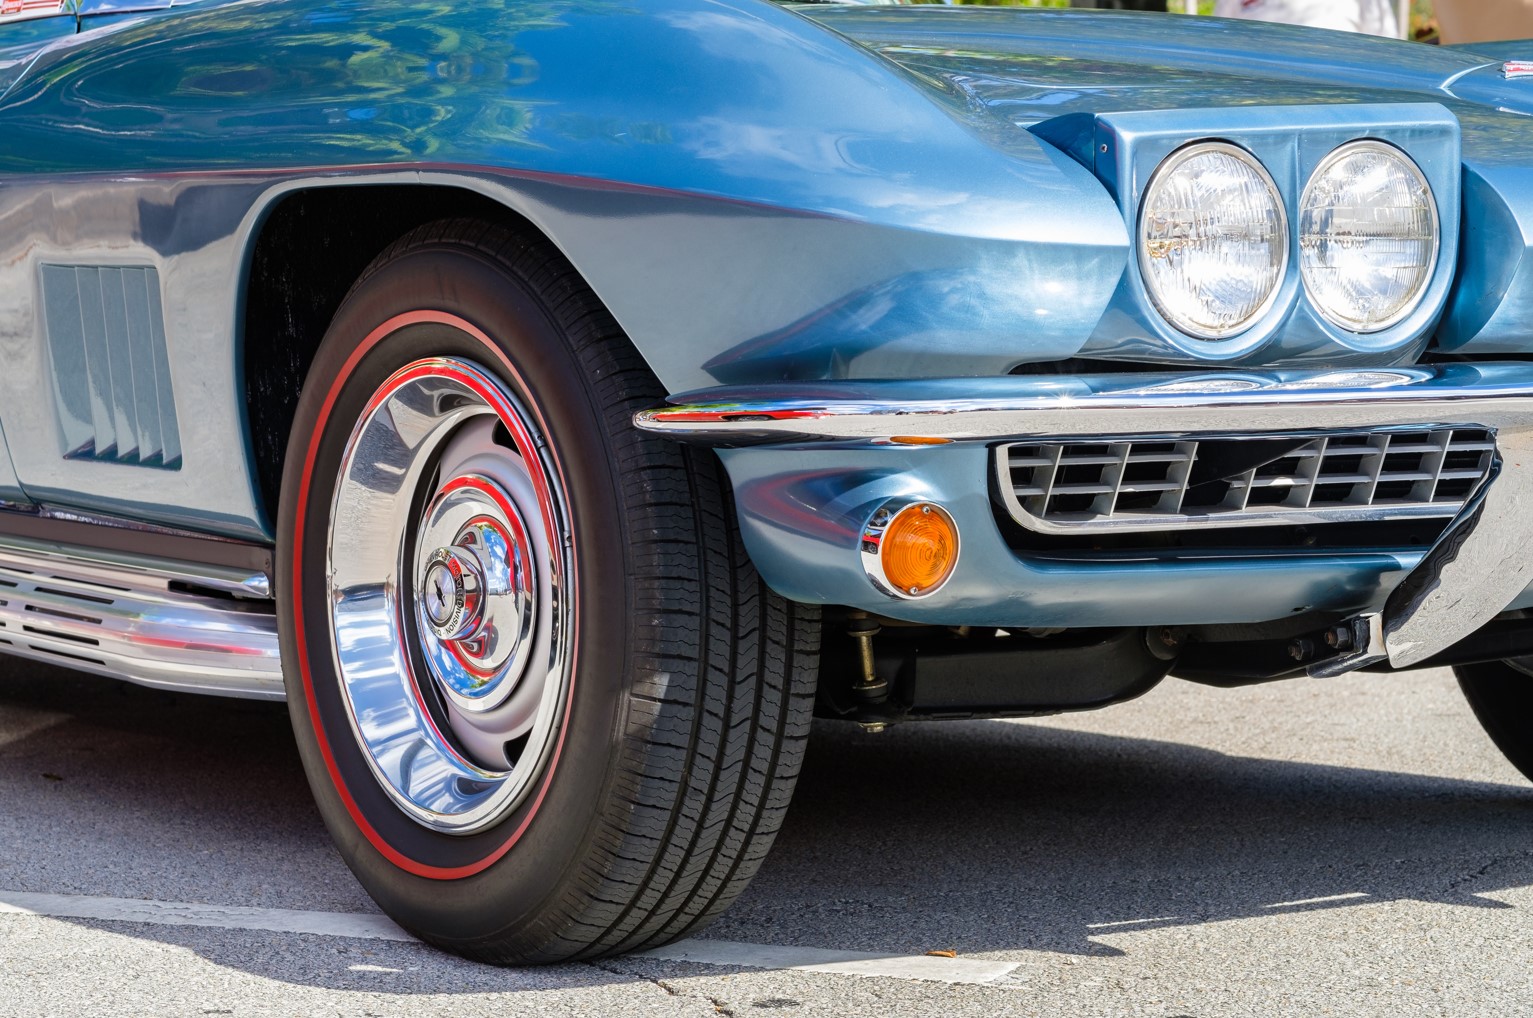 Our Top 10 Favorite Classic Cars